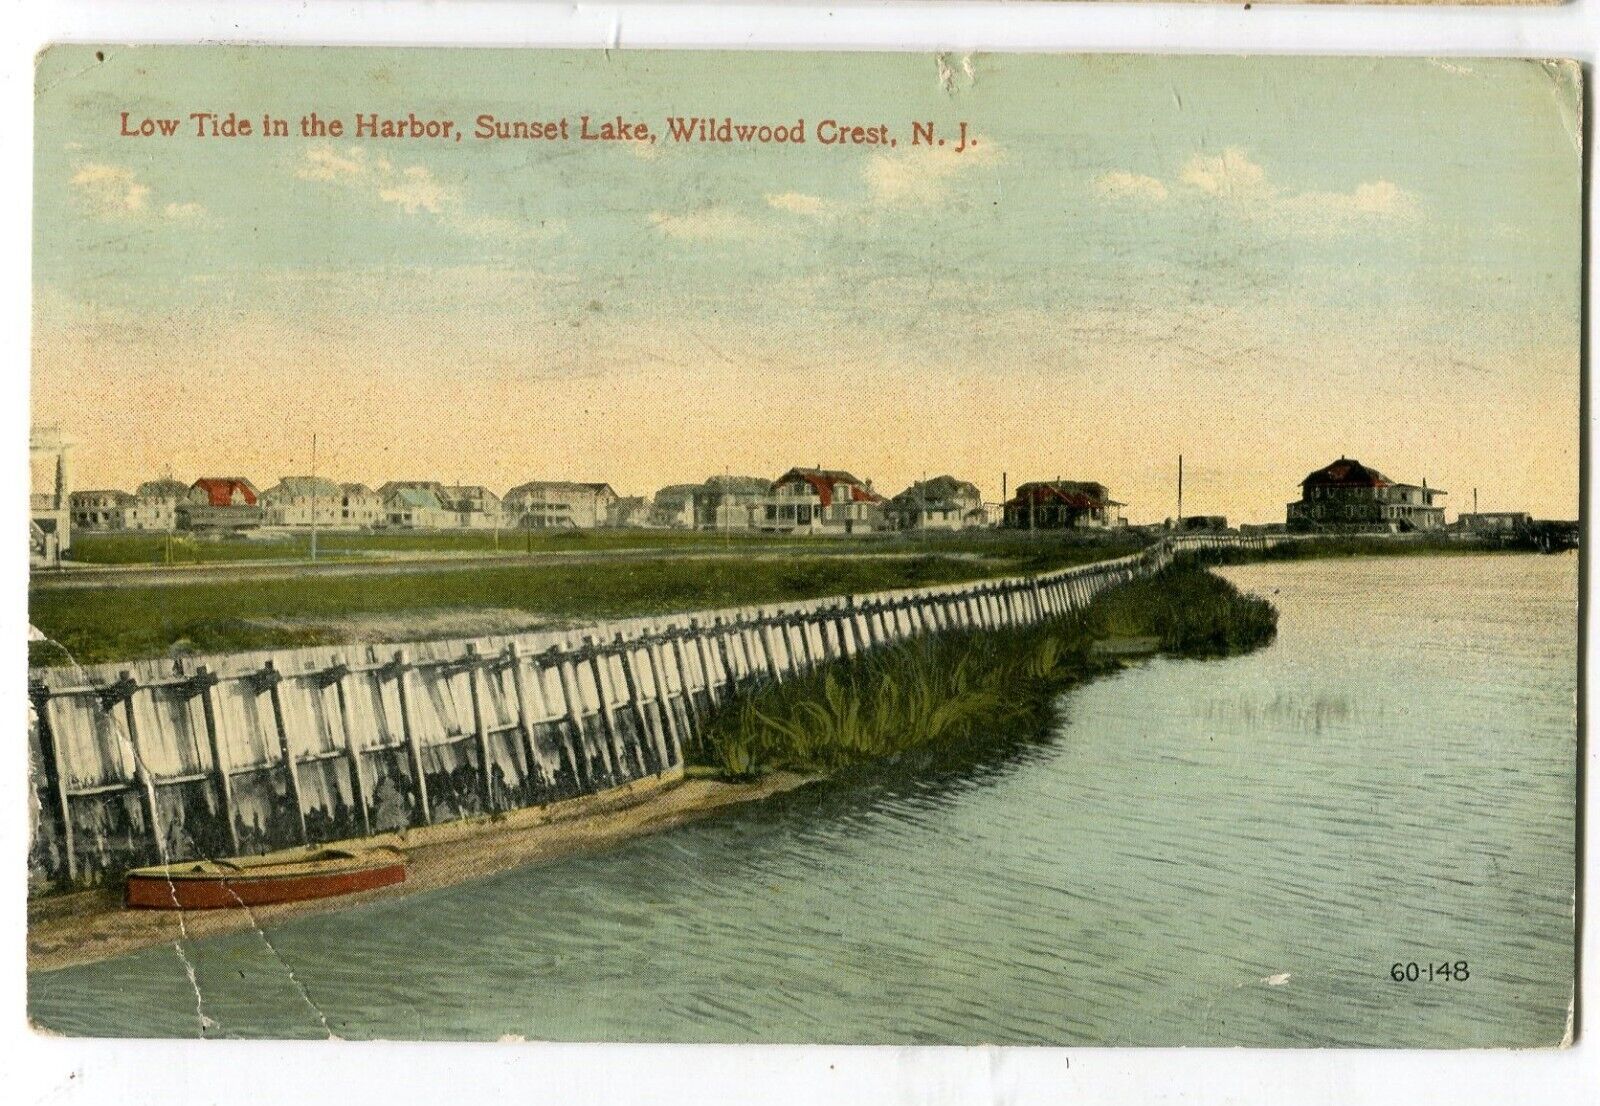 Wildwood Crest NJ Sunset Lake Low Tide in Harbor 10 Homes in Distance 1910 Nice